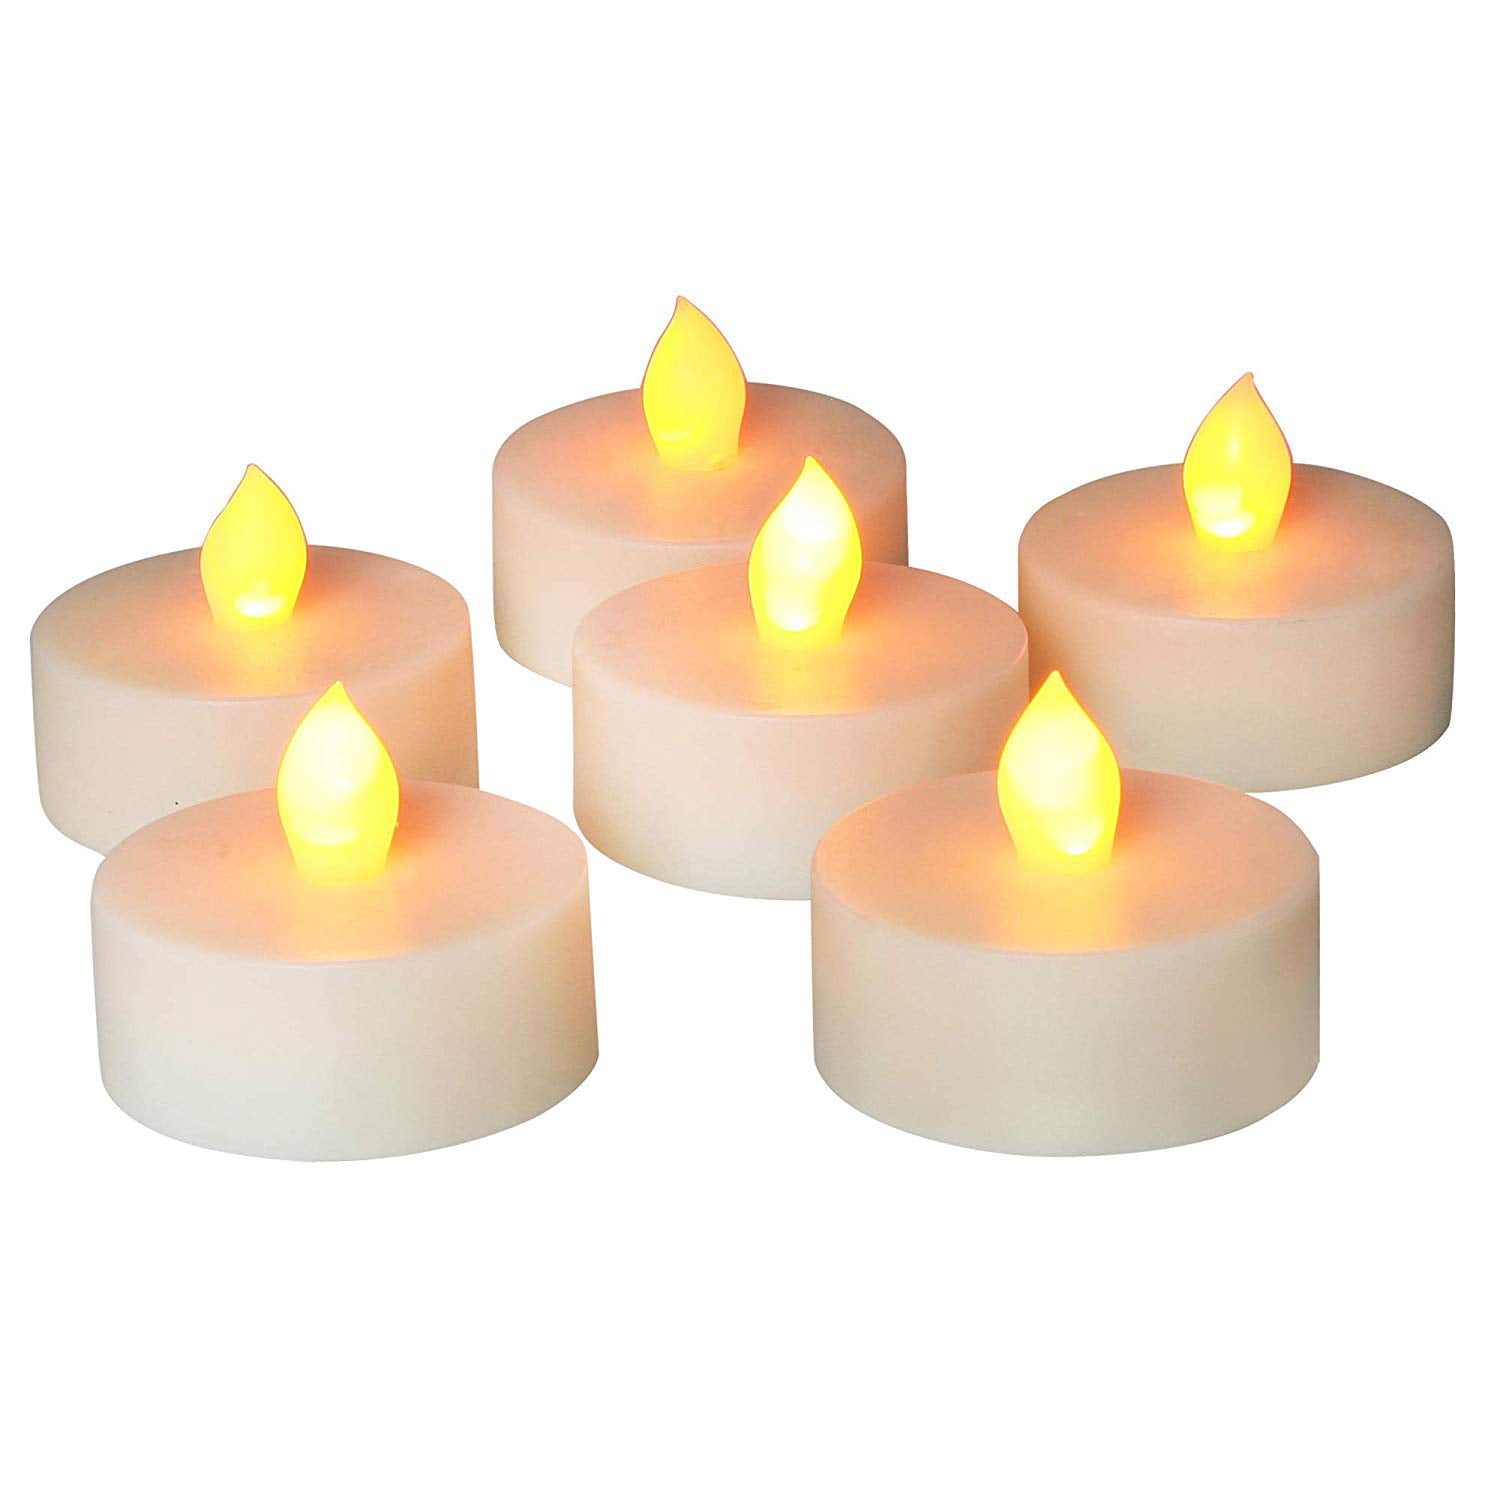 Durable LED Flameless Candle Light Battery Party Wedding Flickering Tealight 